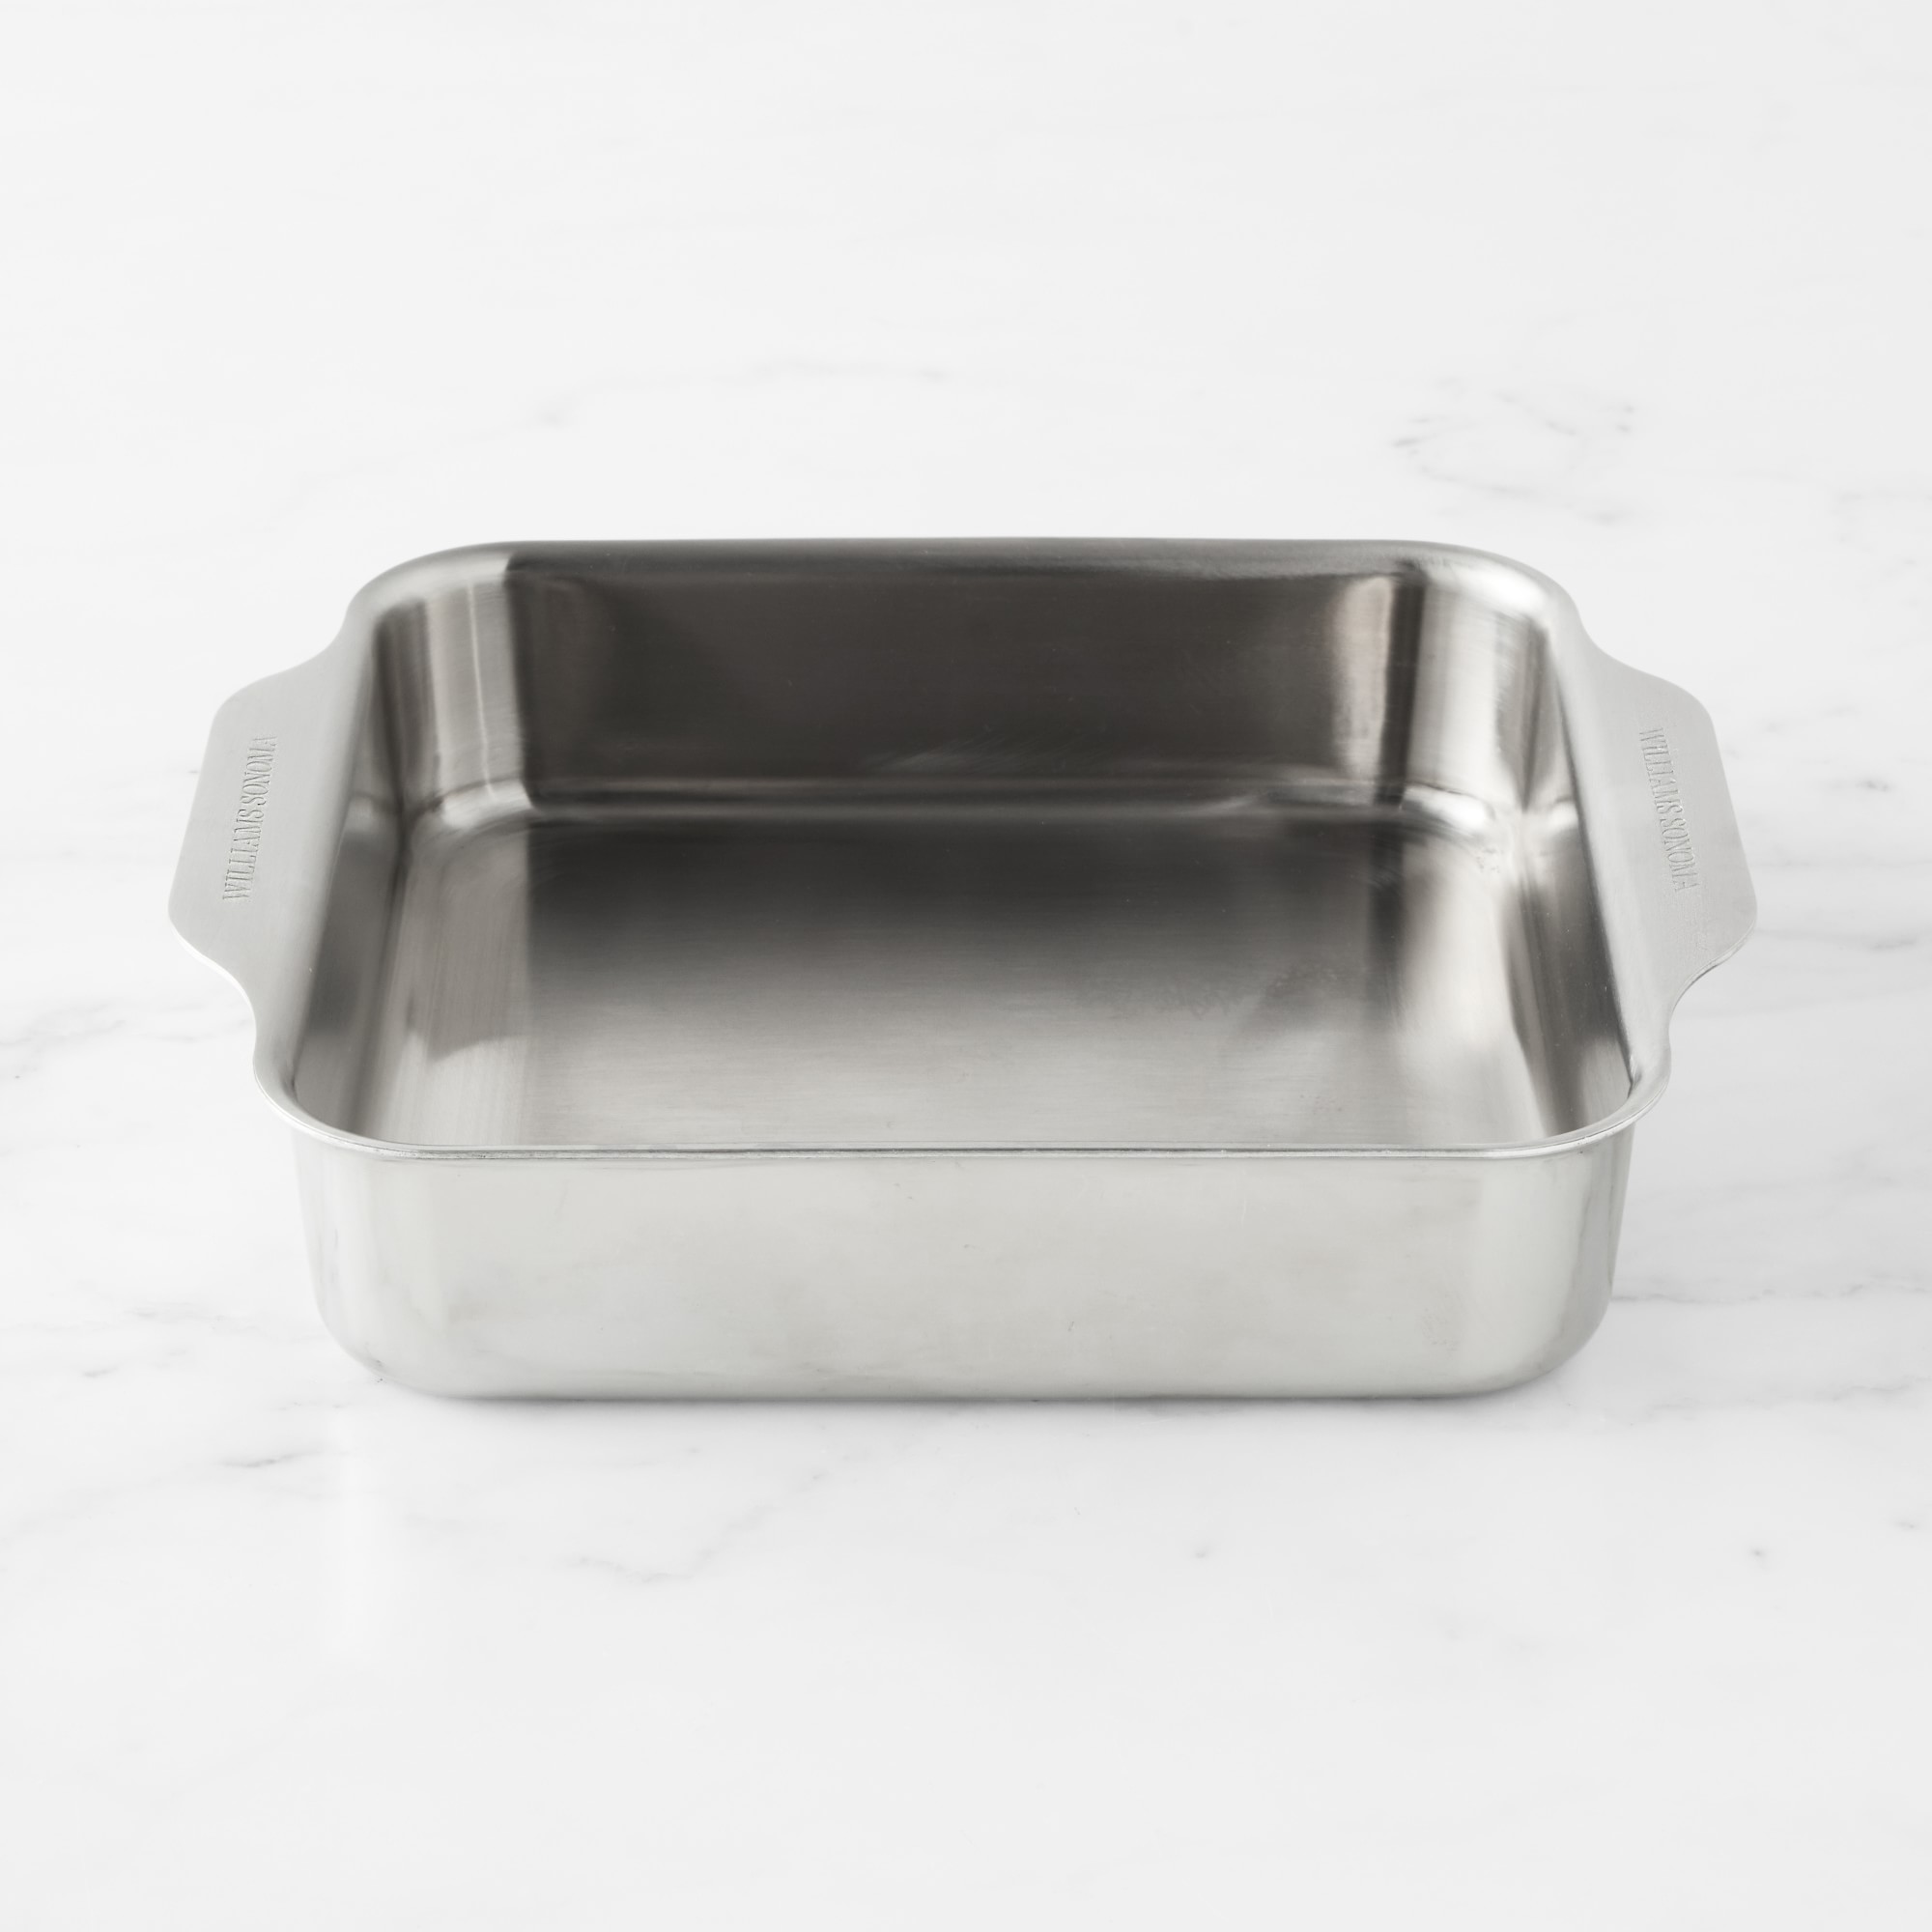 Williams Sonoma Thermo-Clad Stainless-Steel Ovenware Baking Pan, 8" x 8"